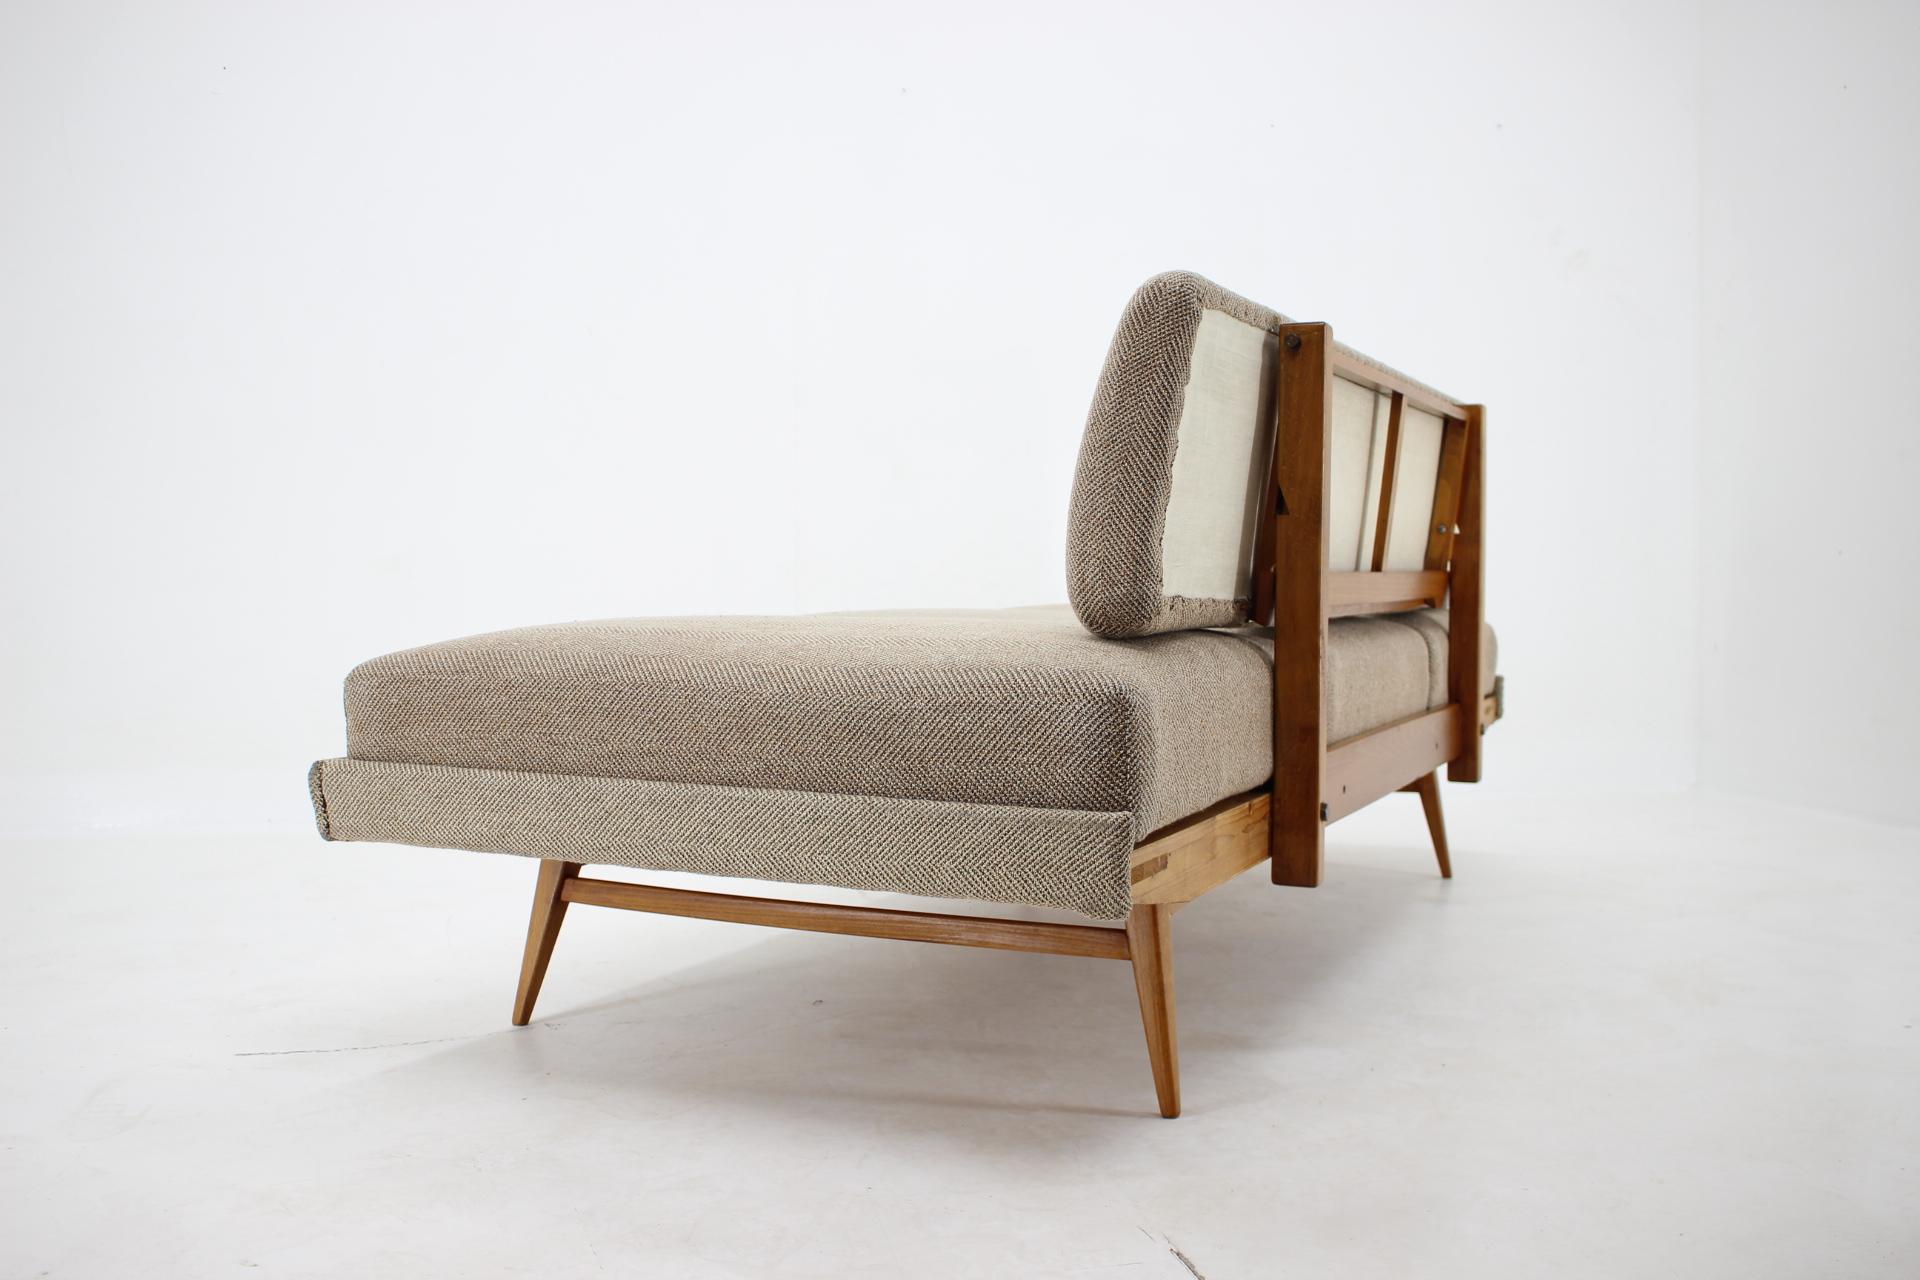 Mid-20th Century Unique and beautiful adjustable sofa in style of Knoll - around 1960s/